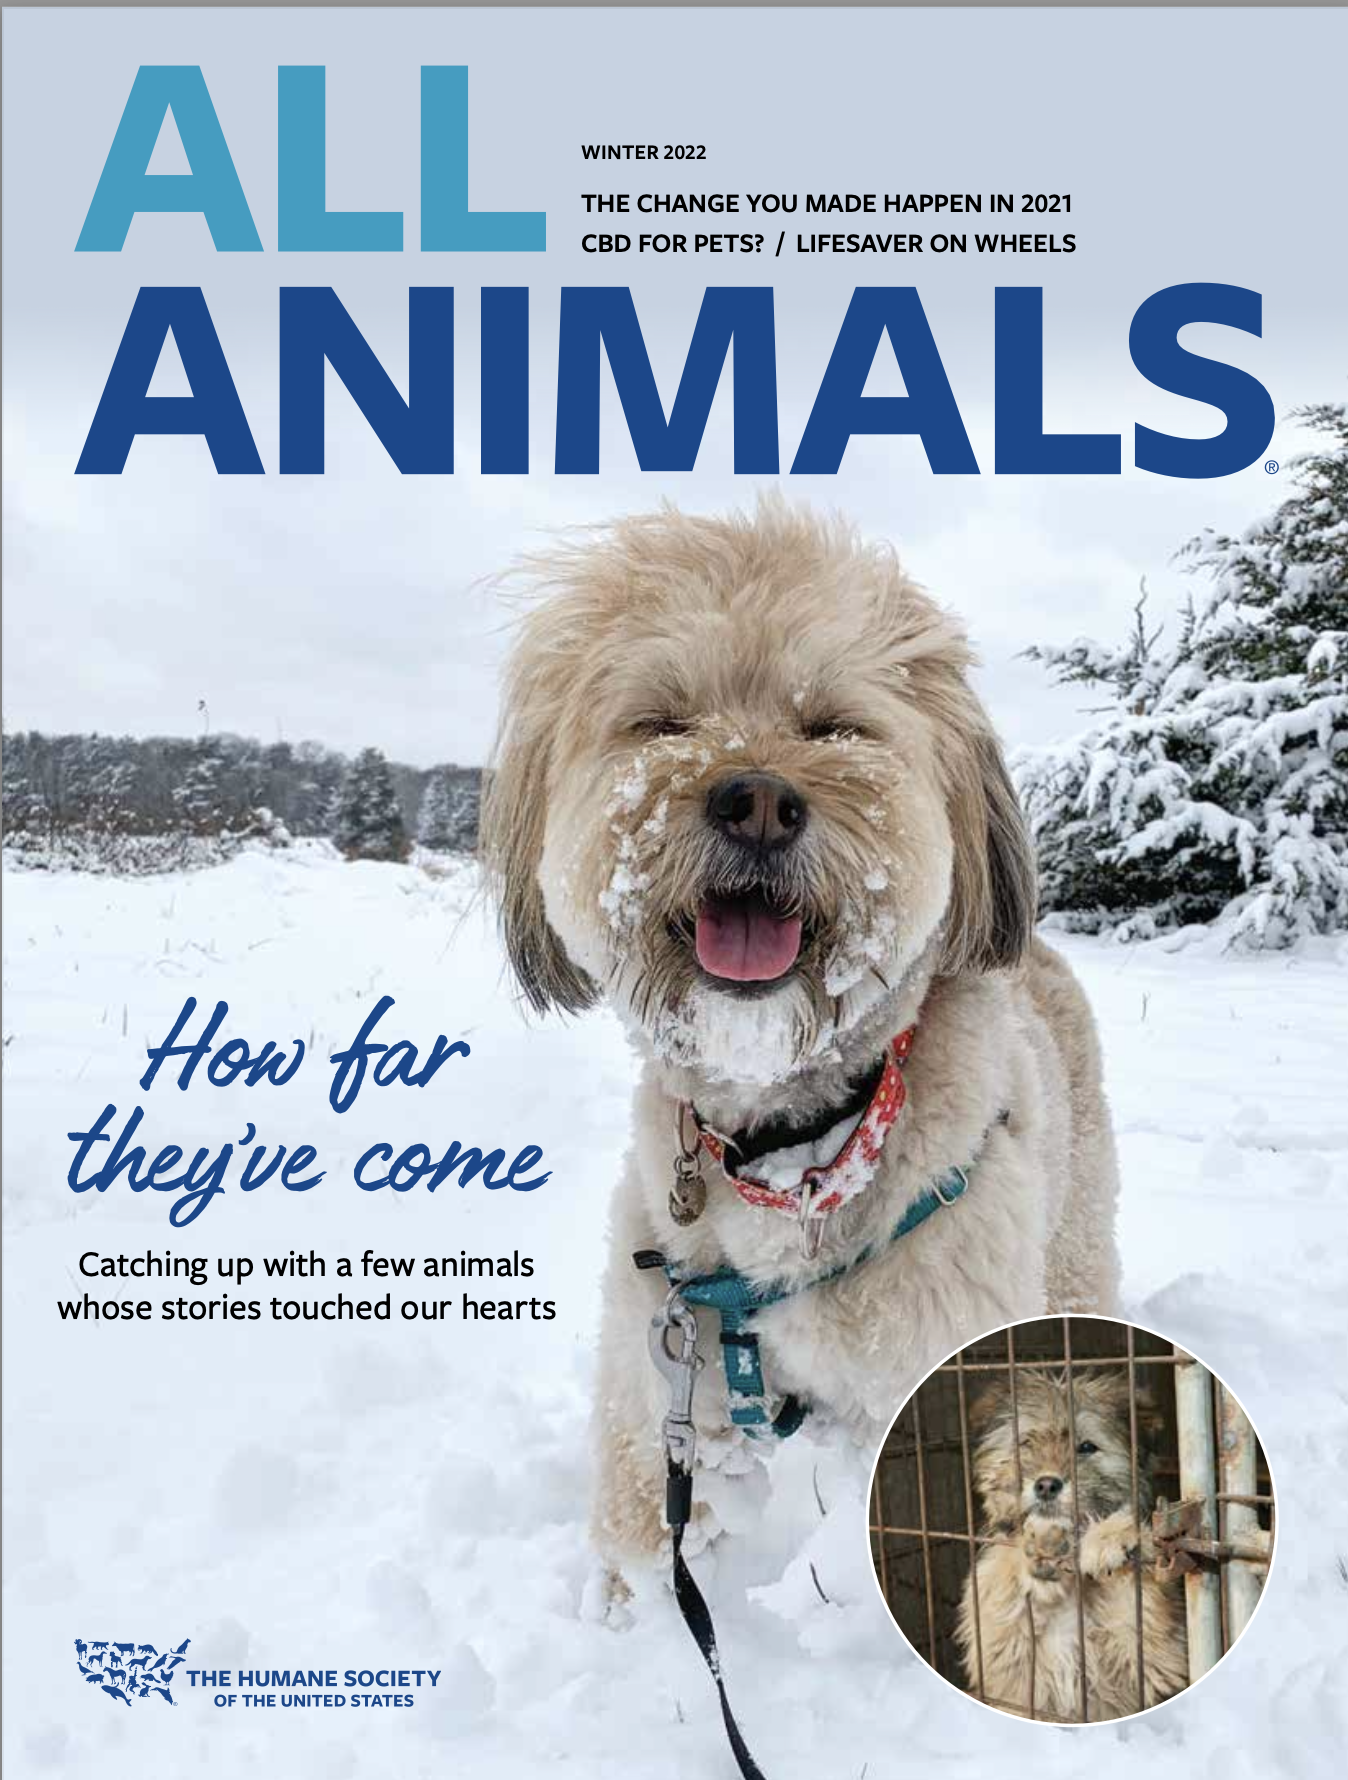 The cover of All Animals magazine